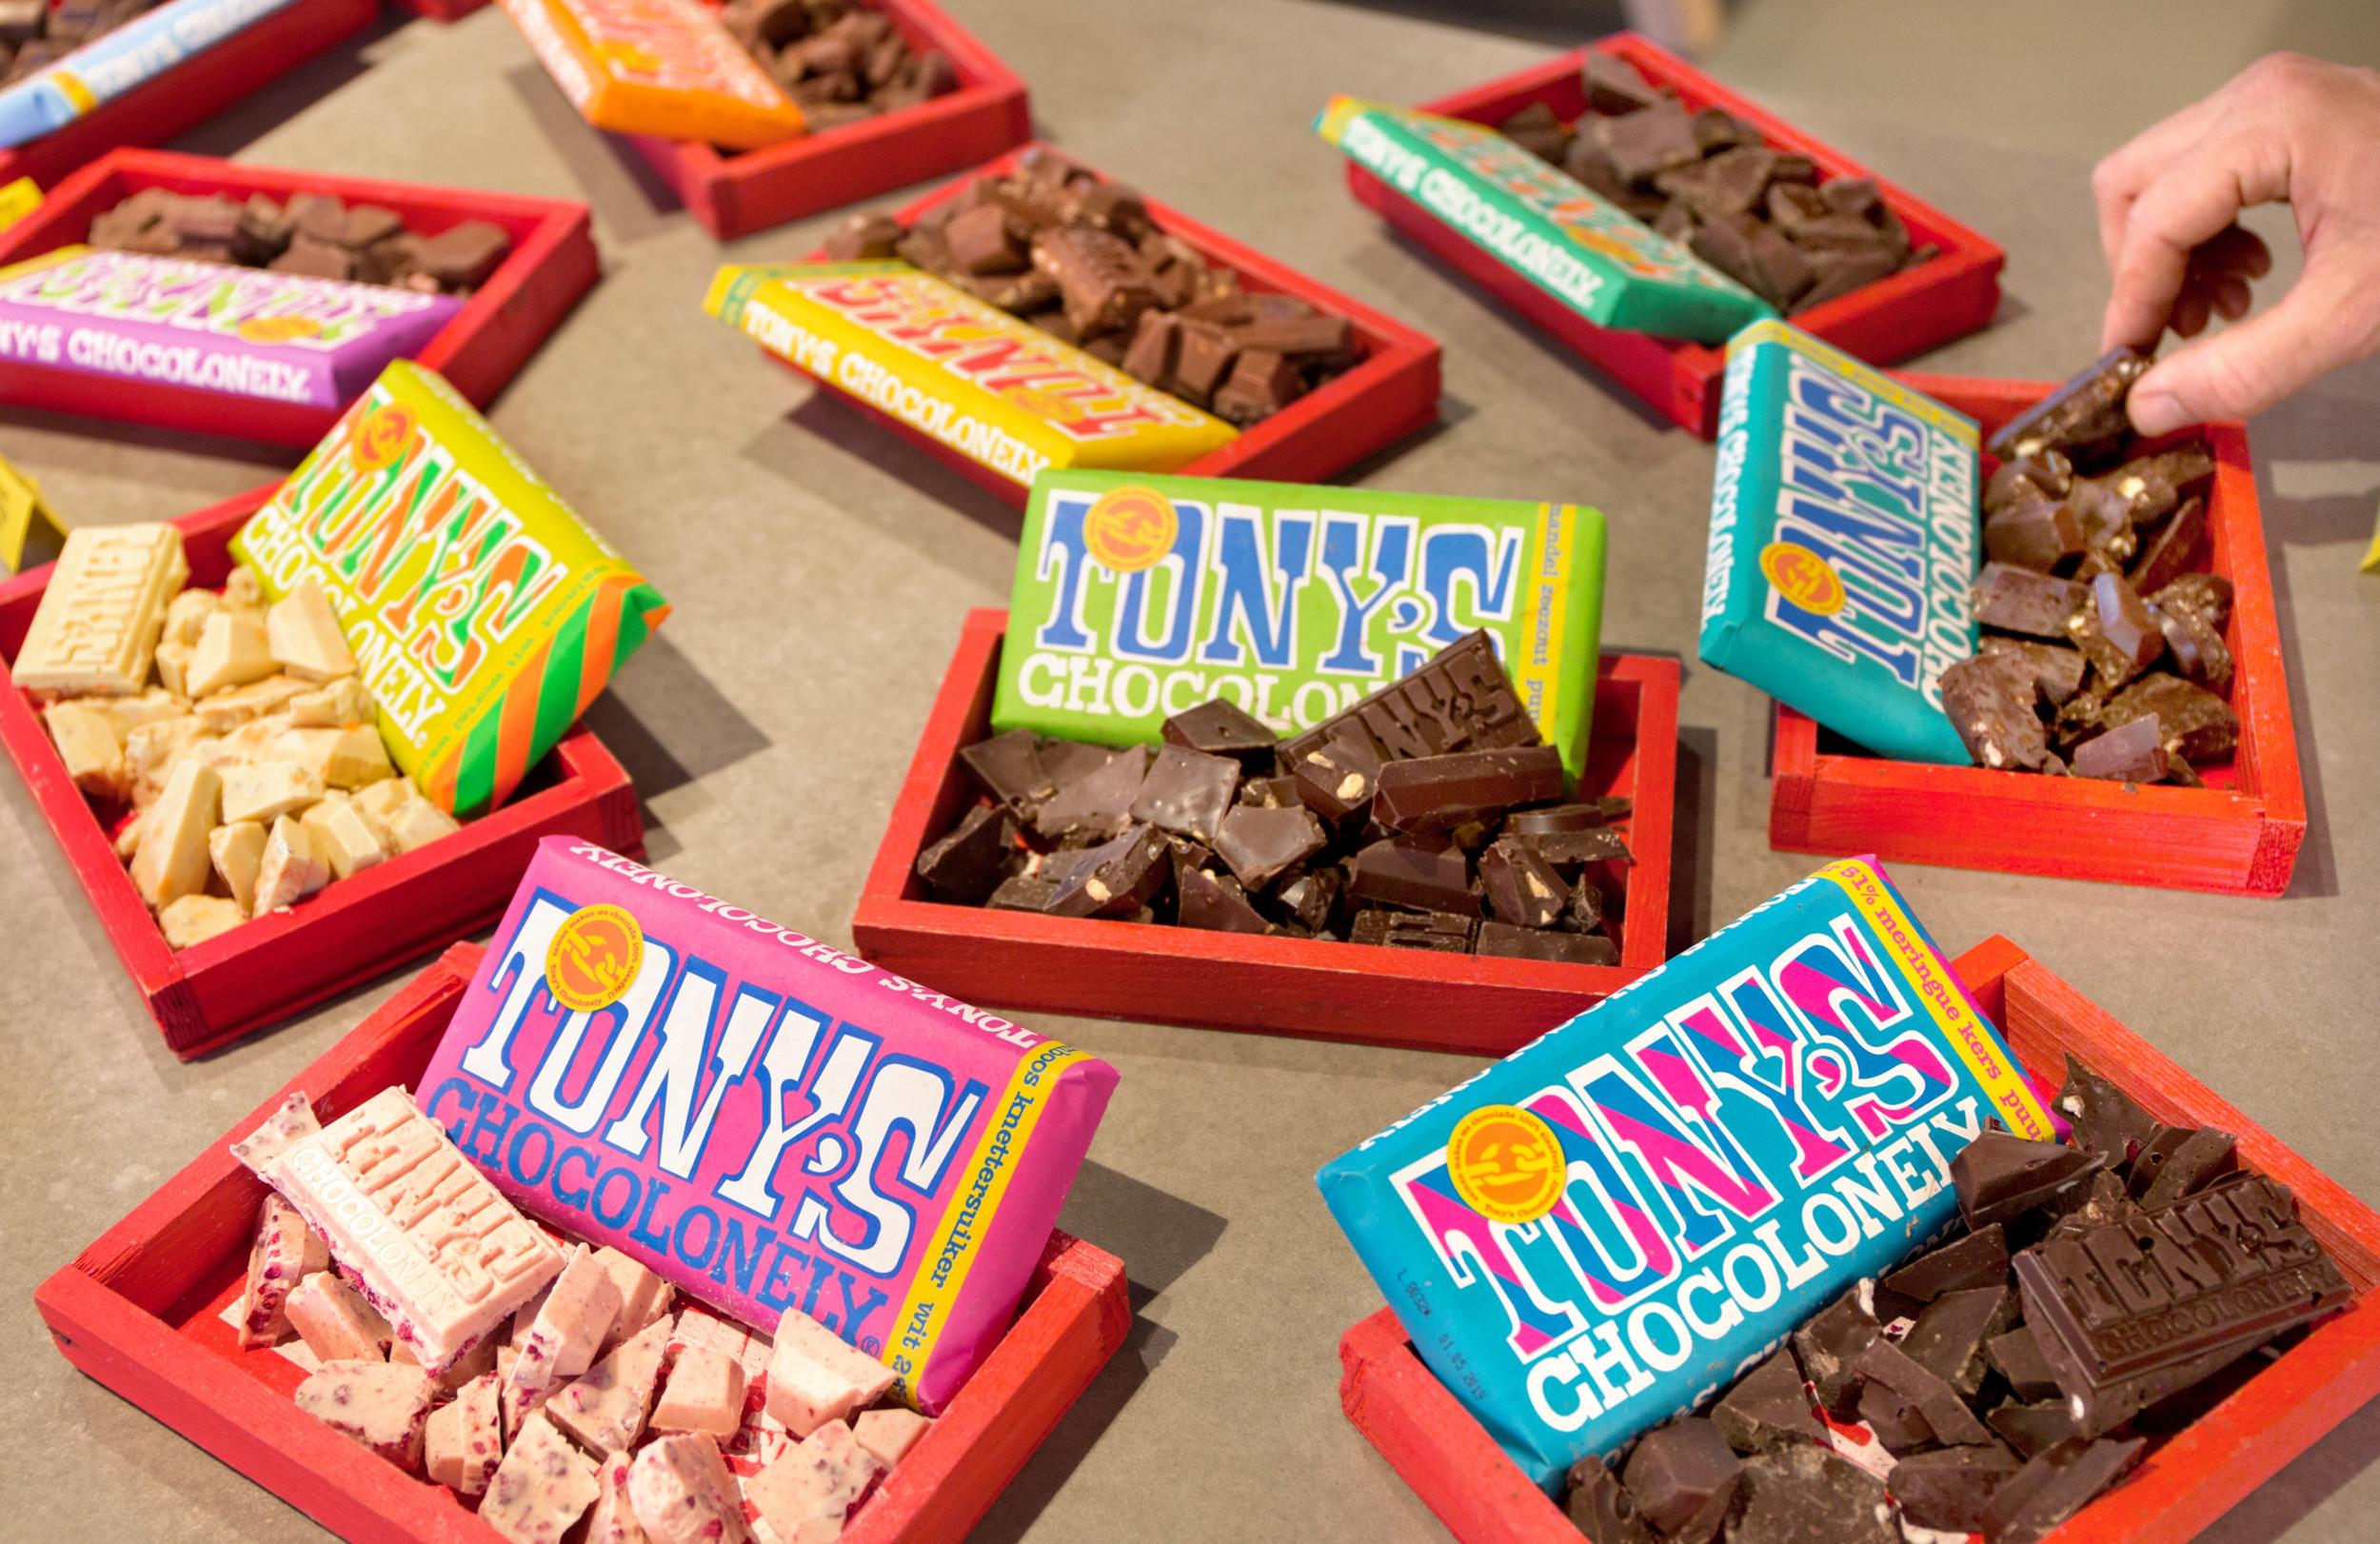 Tony’s Chocolonely opent pop-up in Brussel